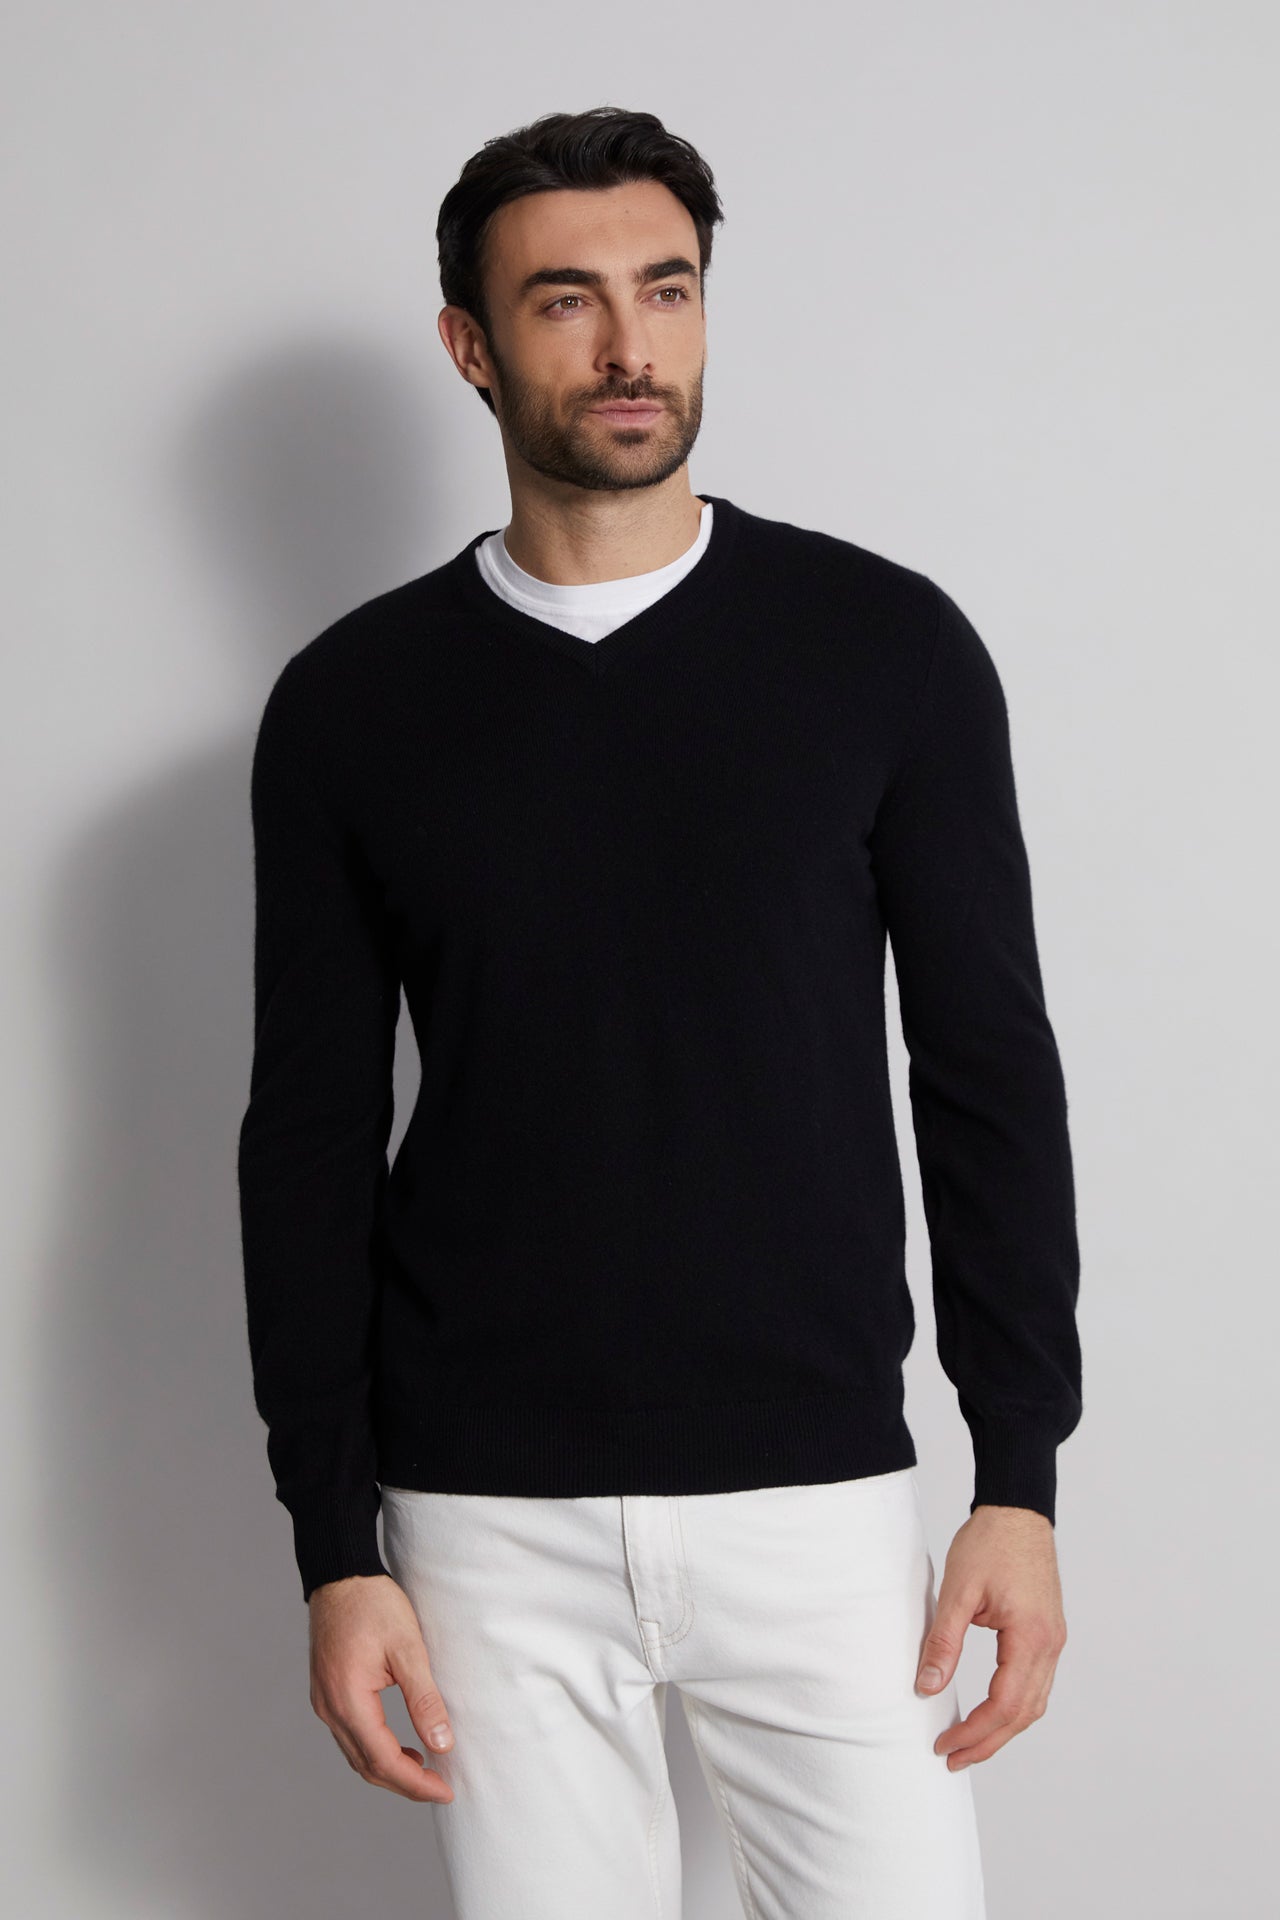 Iconic cashmere pullover